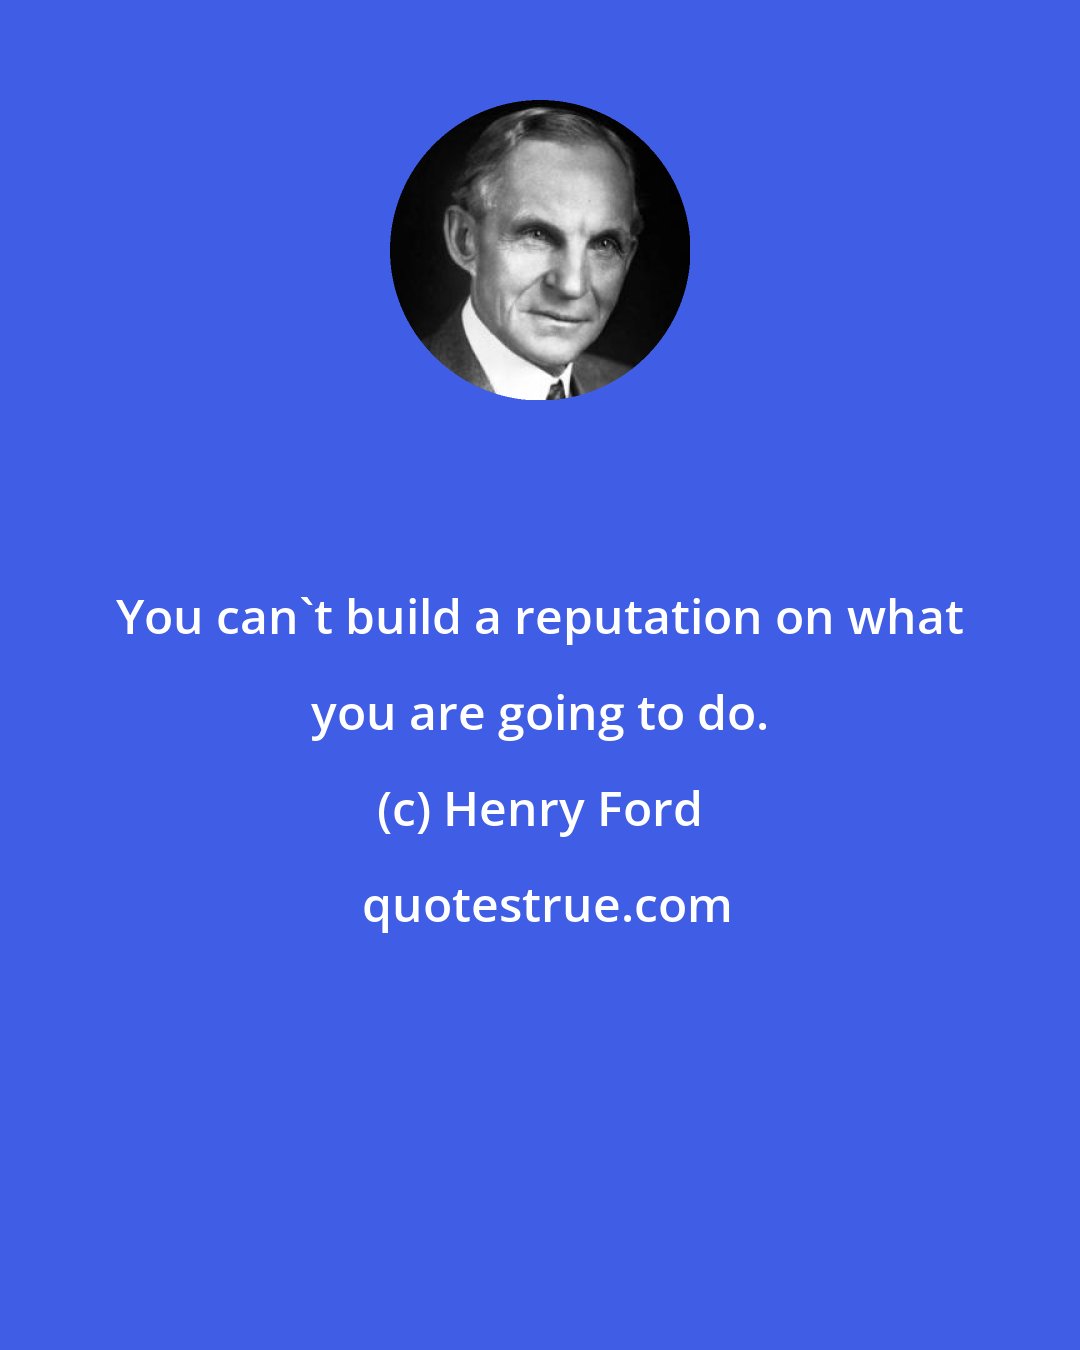 Henry Ford: You can't build a reputation on what you are going to do.